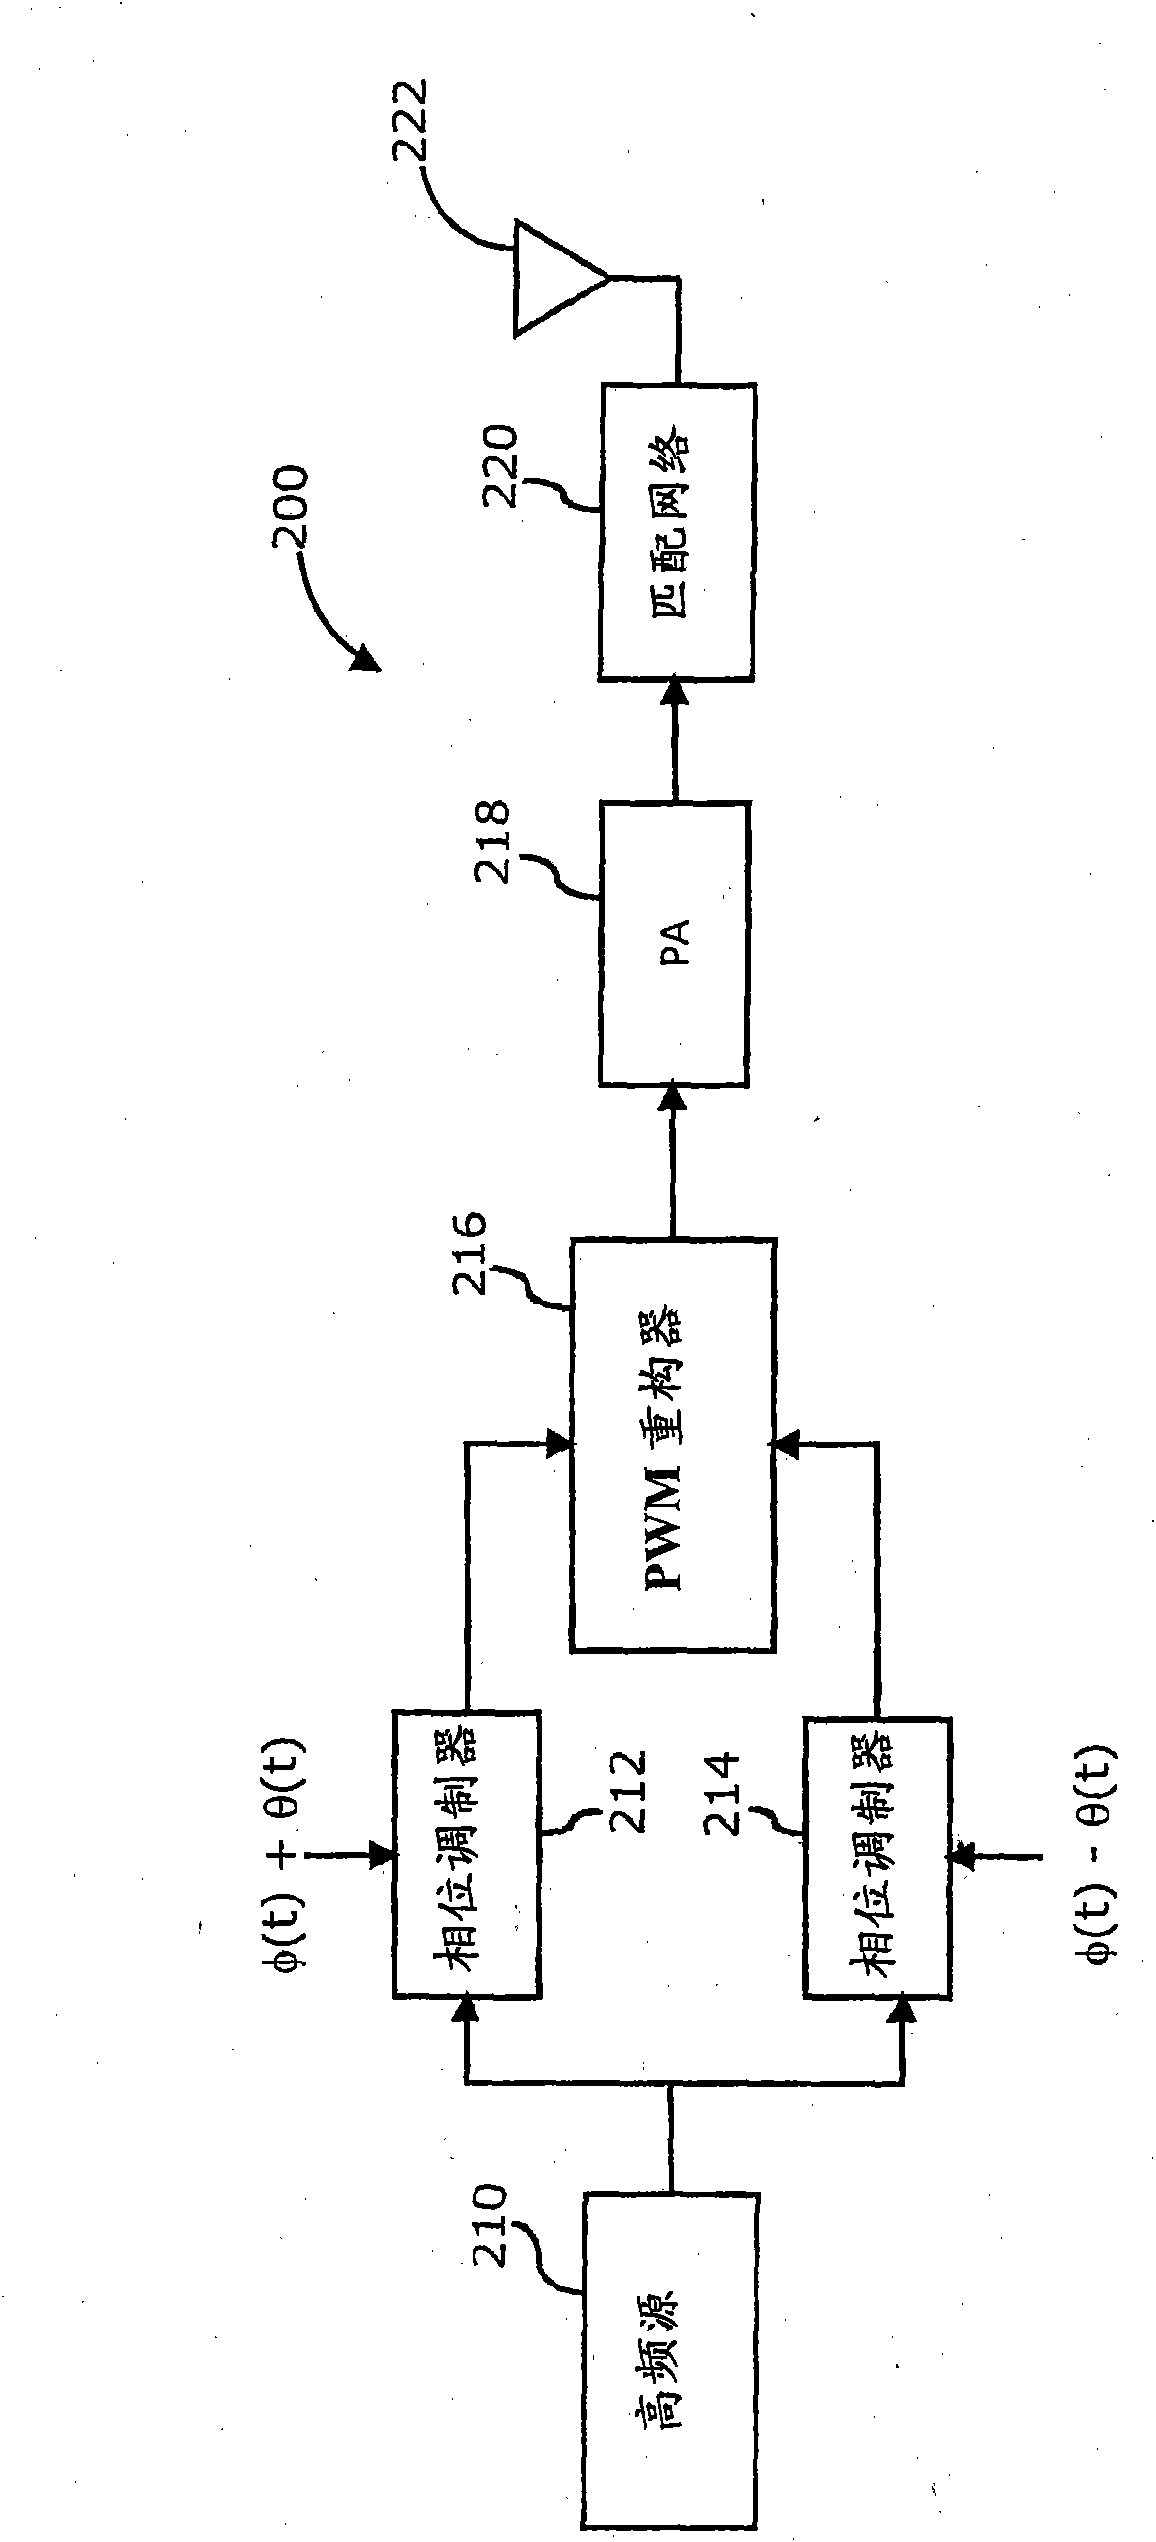 Cascaded phase pulse position and pulse width modulation based digital transmitter